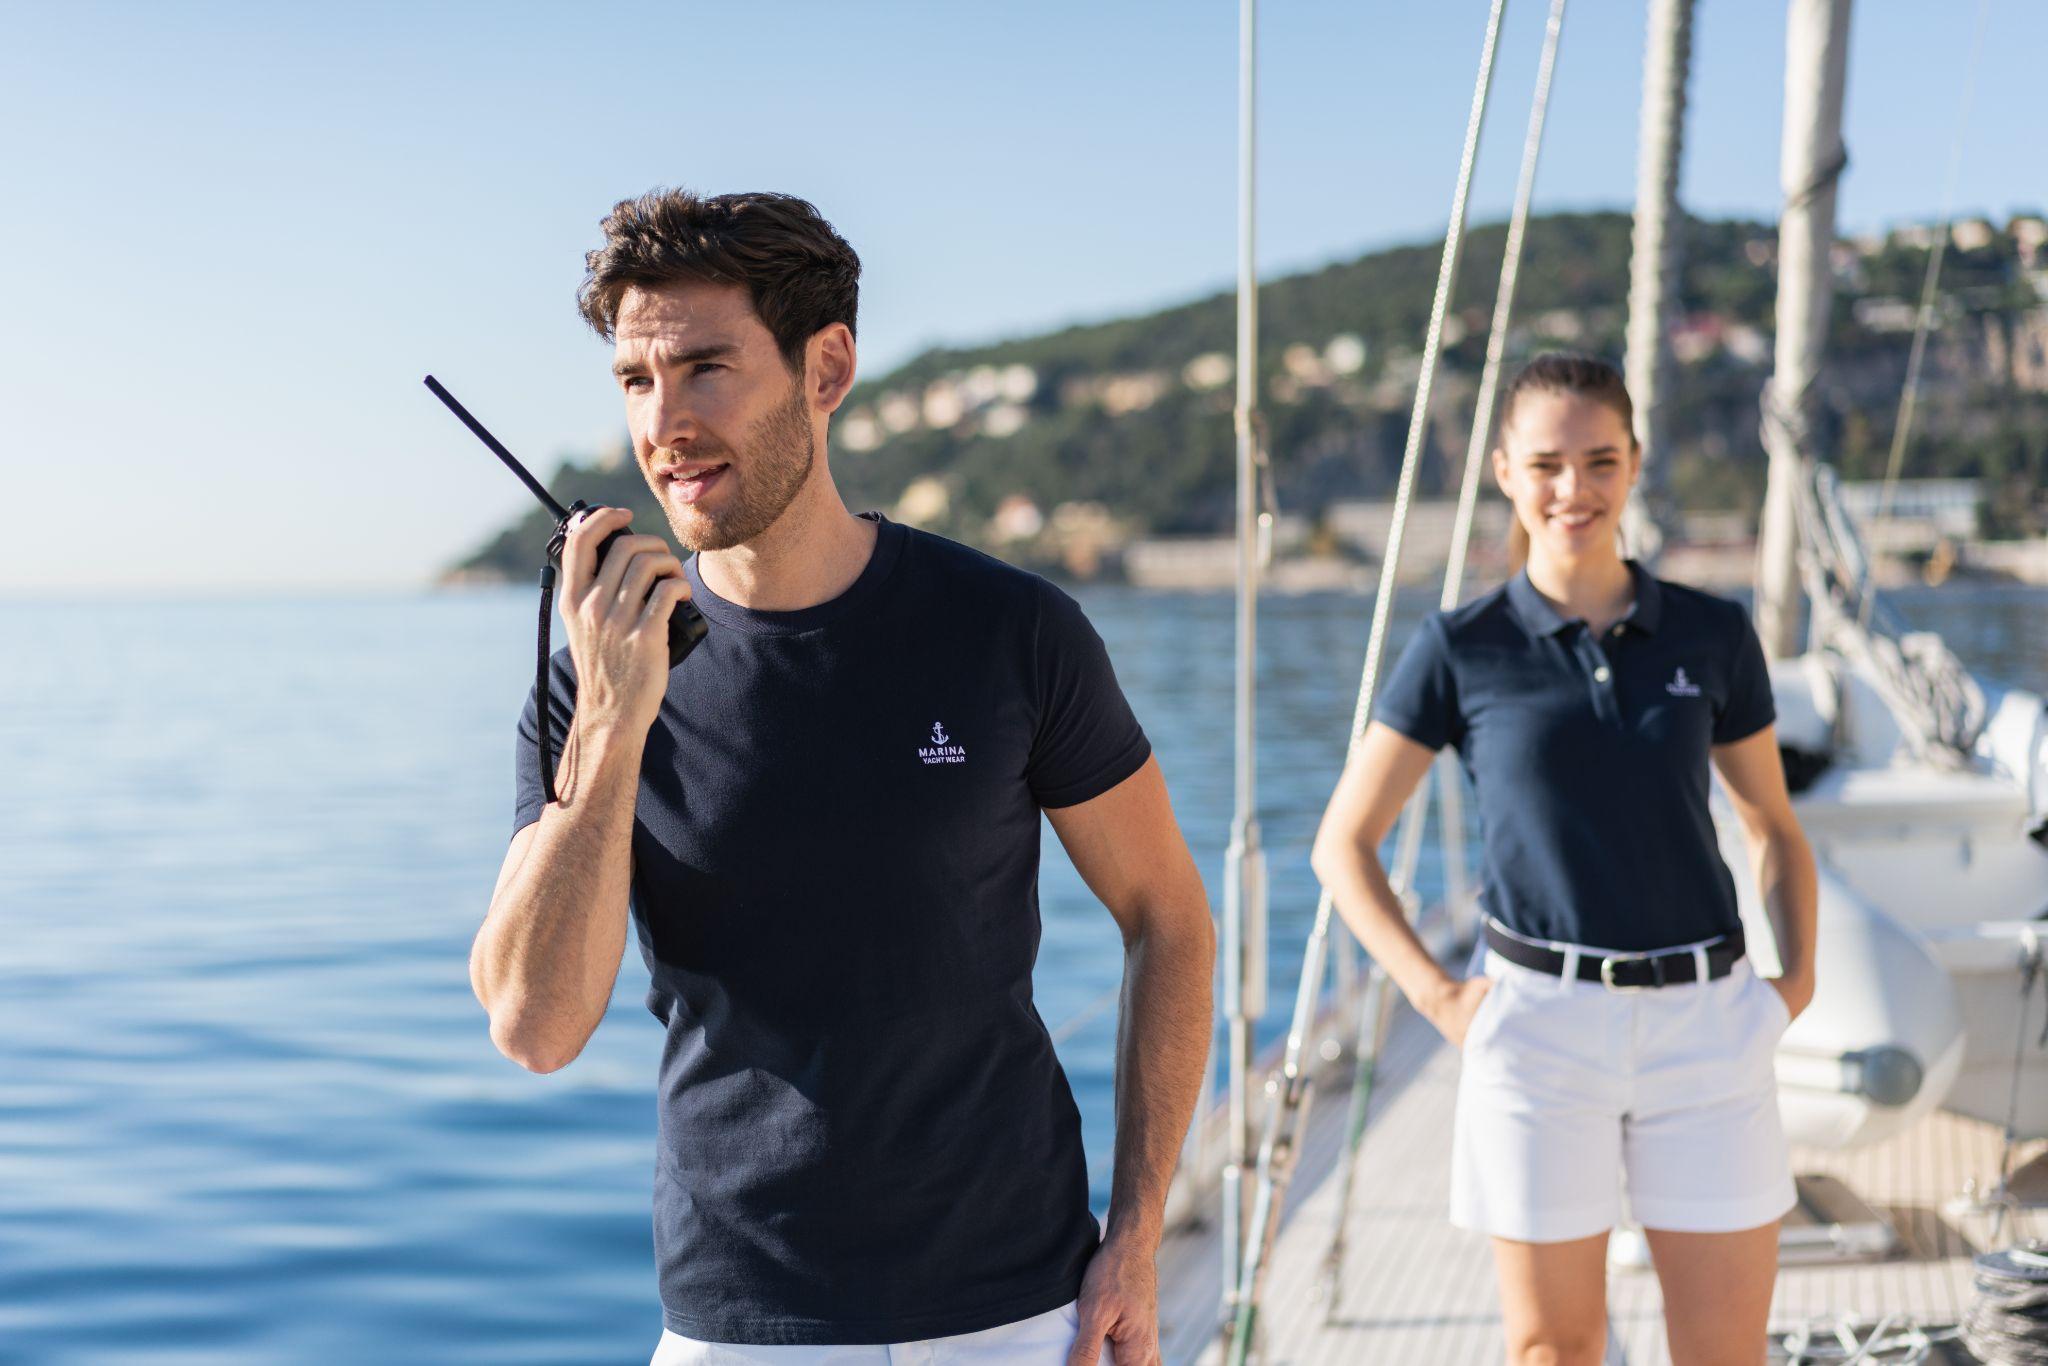 yachting wear brands